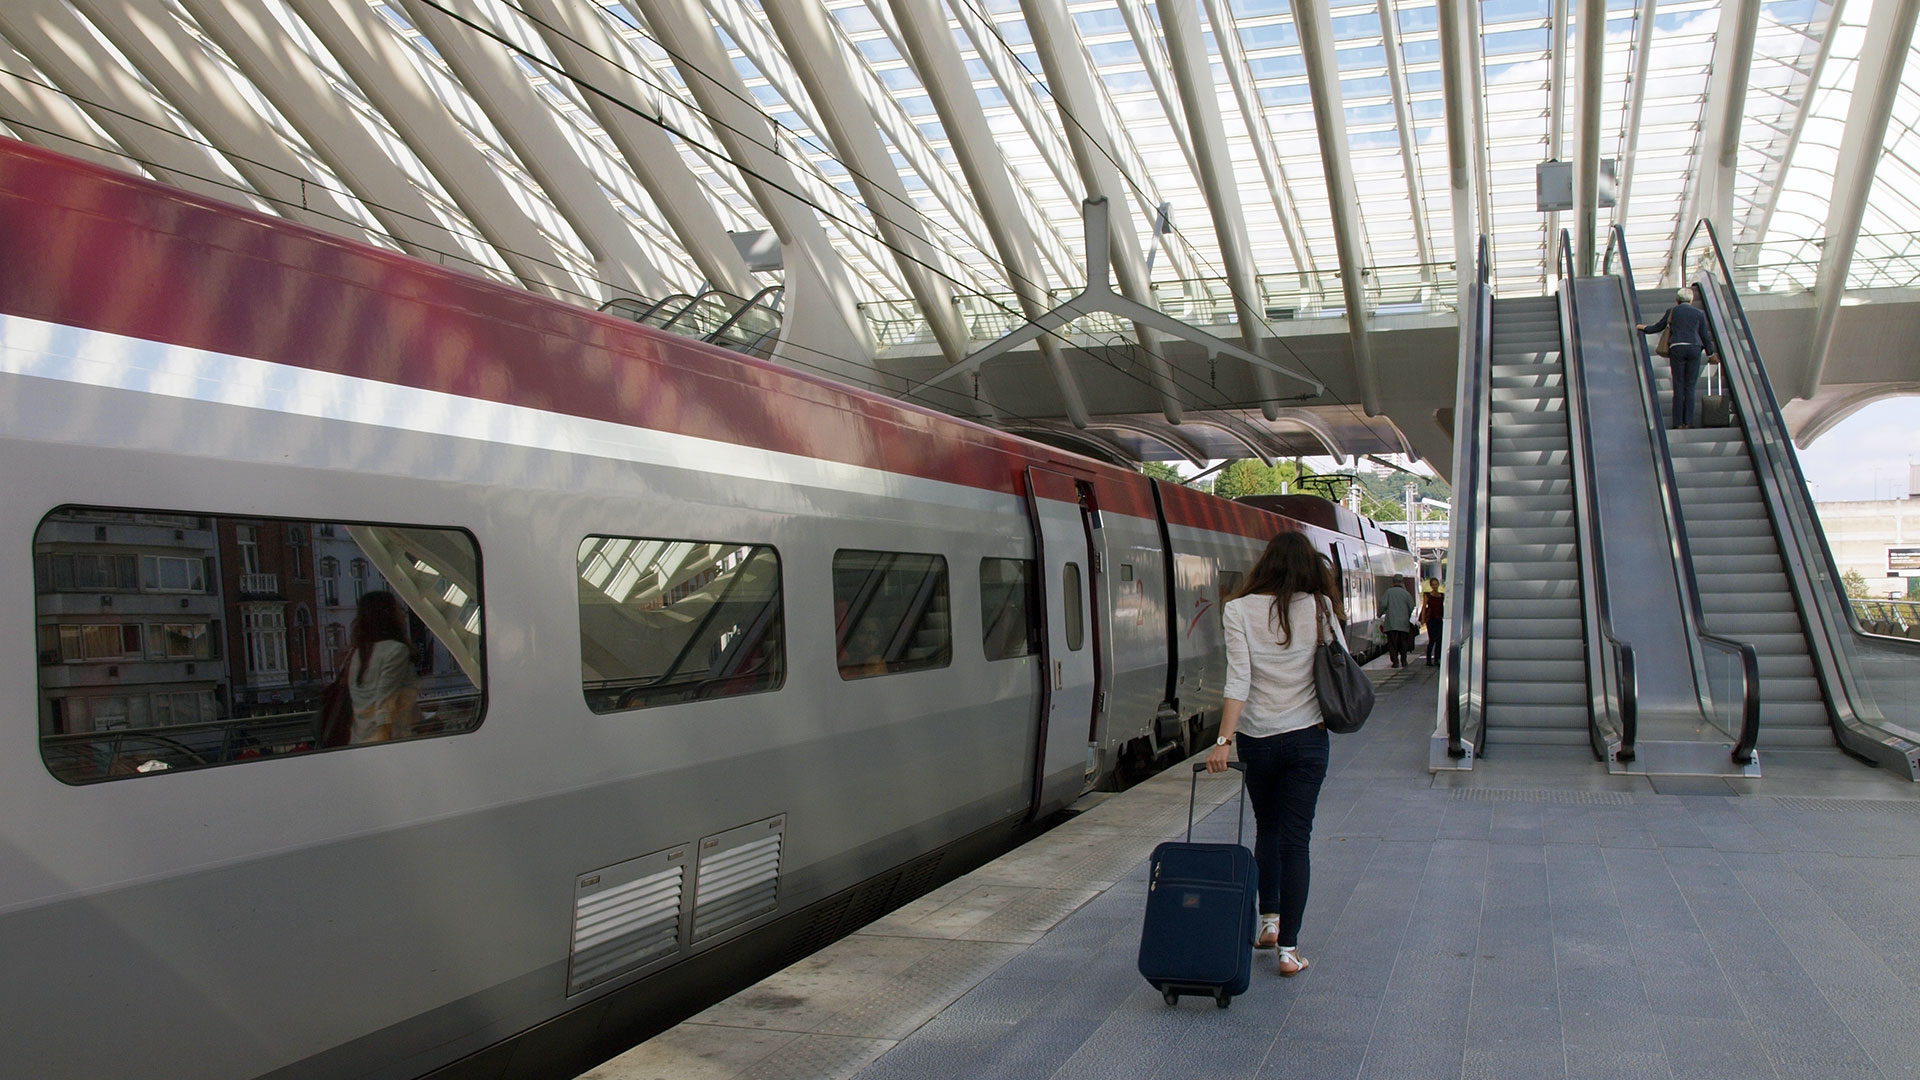 A Thalys high-speed train pauses at Liège-Guillemins station in eastern Belgium (photo © hidden europe).